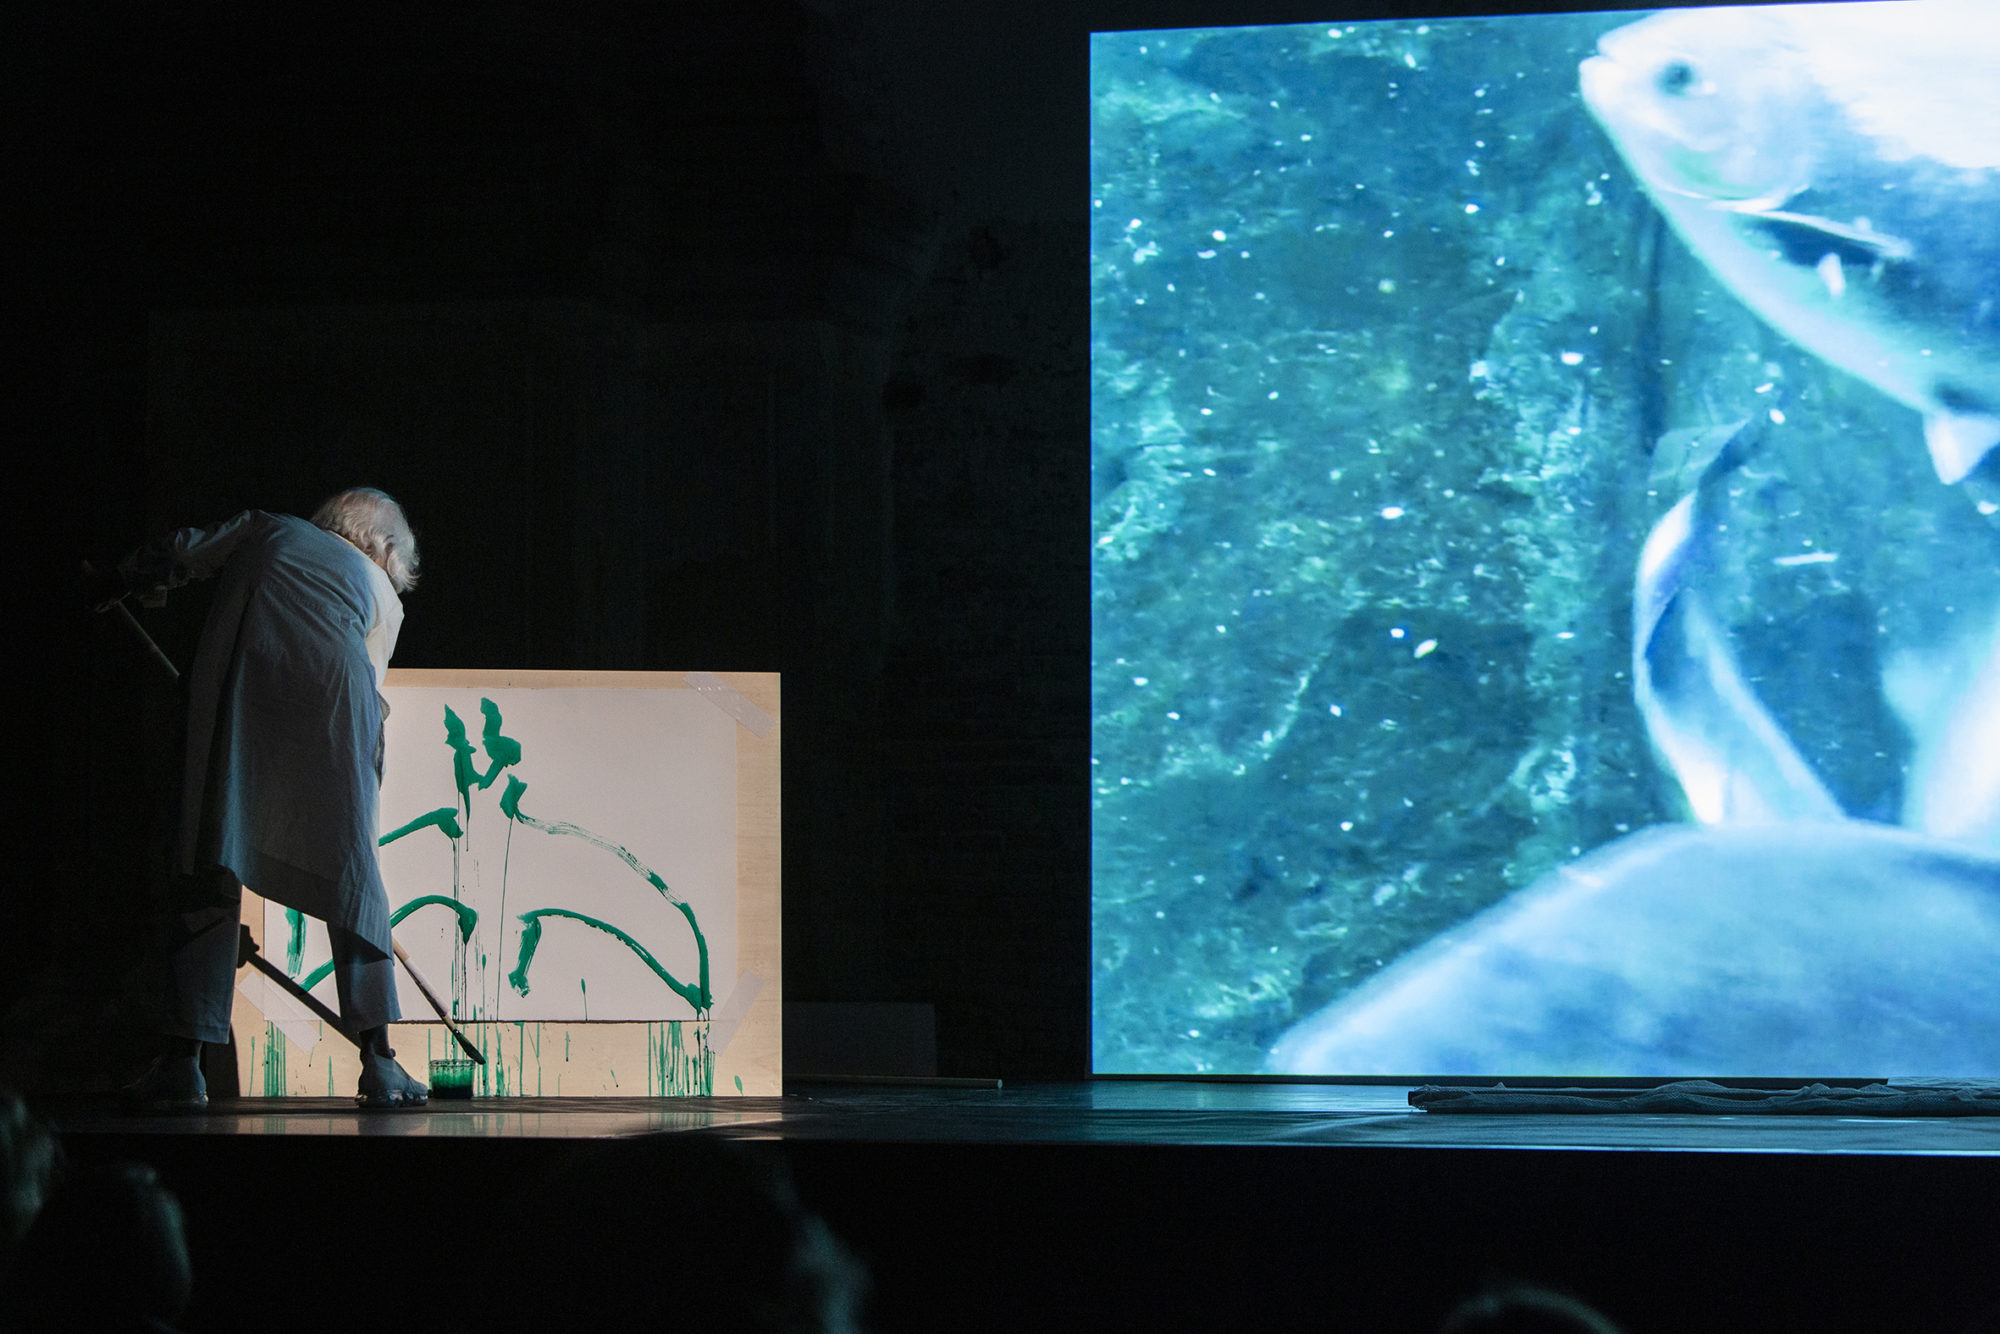 Joan Jonas, an older white woman artist, performing in front of an aquarium projection and a green painted fish.